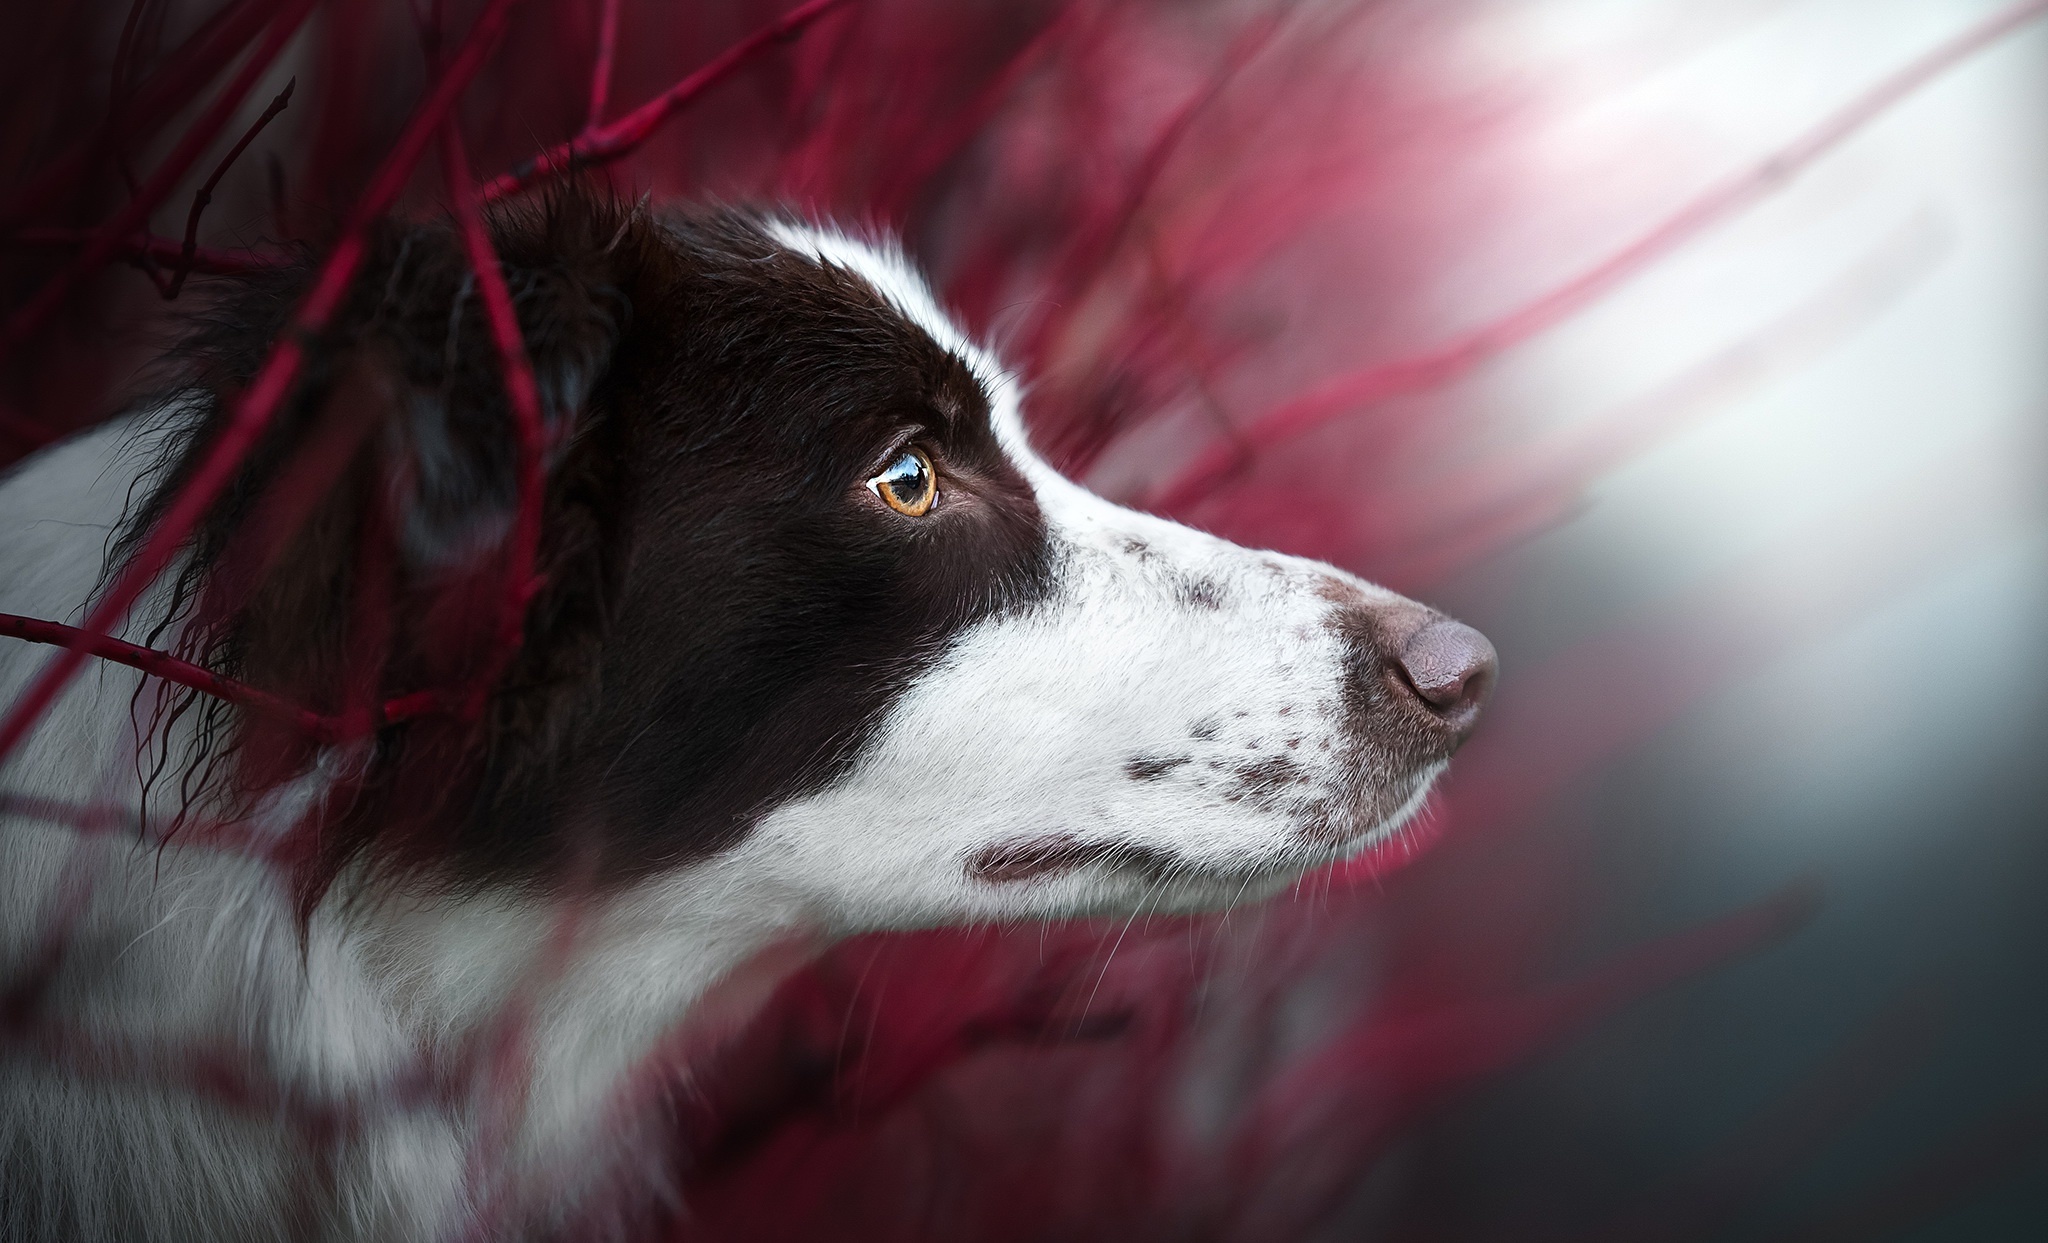 Image: Dog, border collie, breed, snout, watching, blurred background